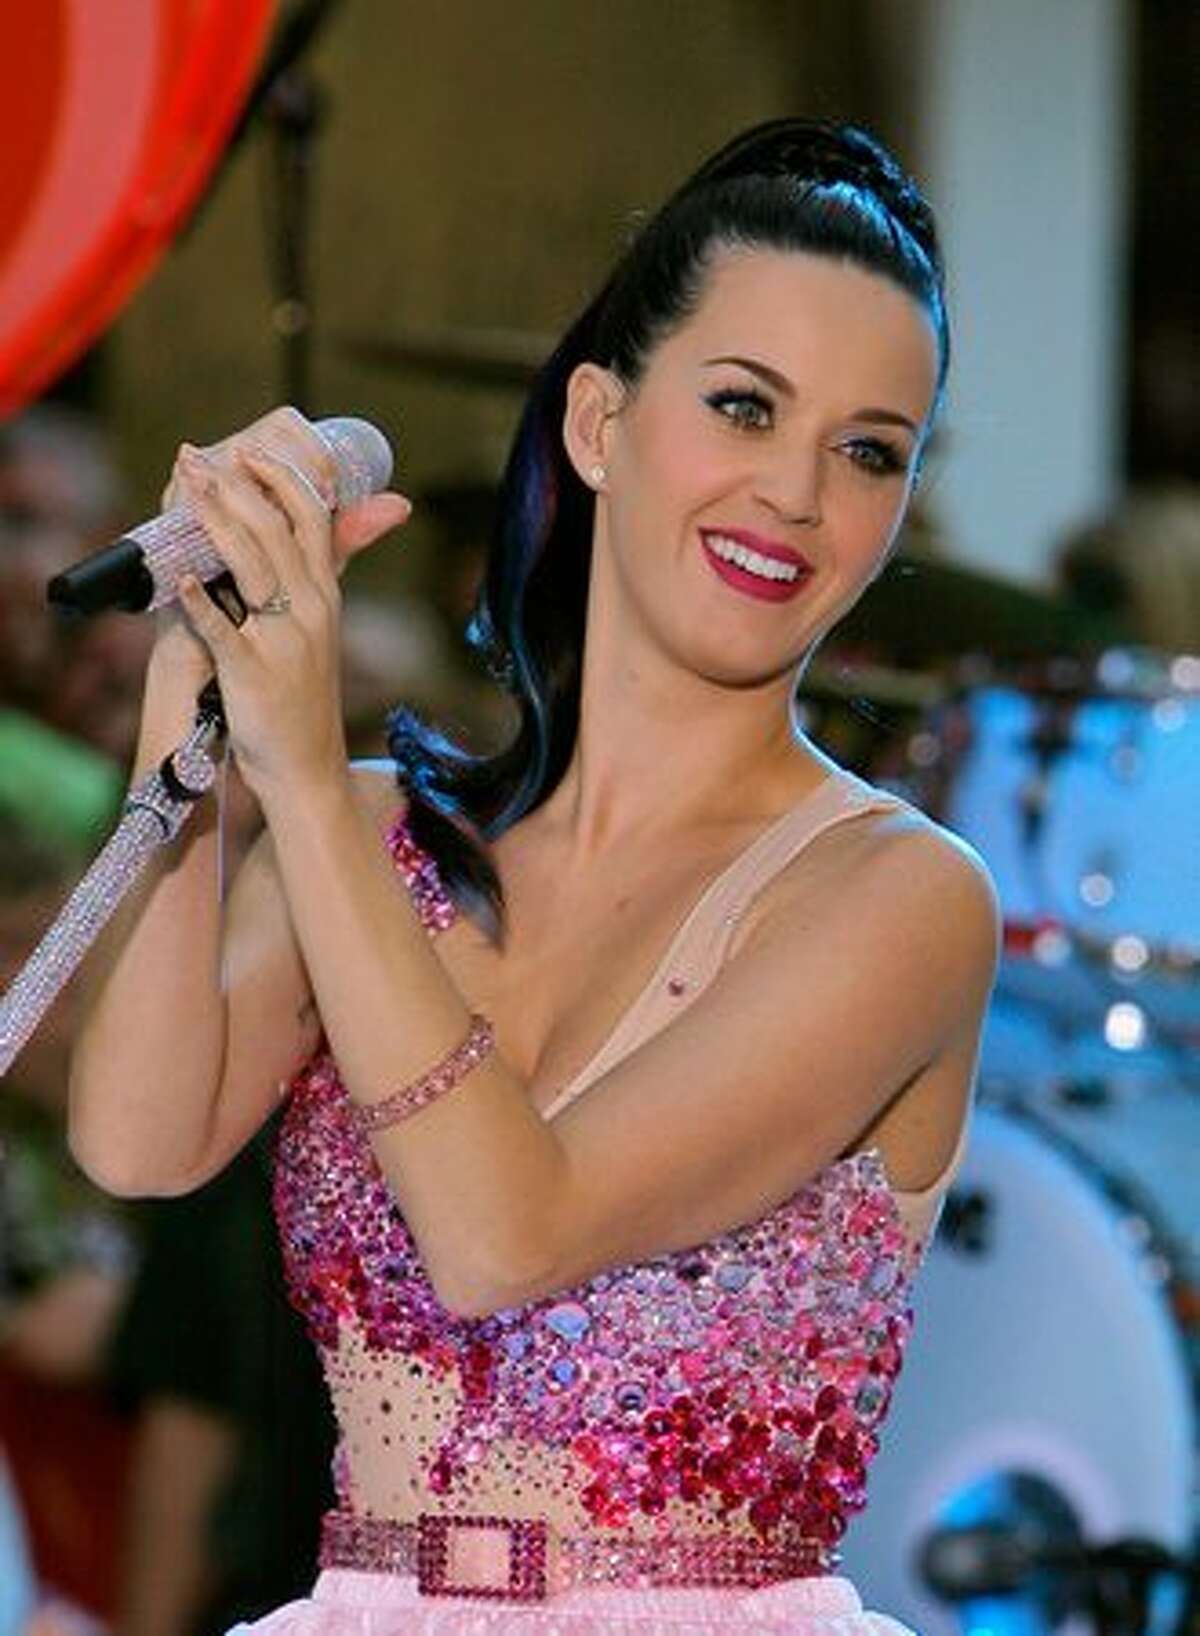 Singer Katy Perry performs on NBC's "Today" in Rockefeller Center in New York City.